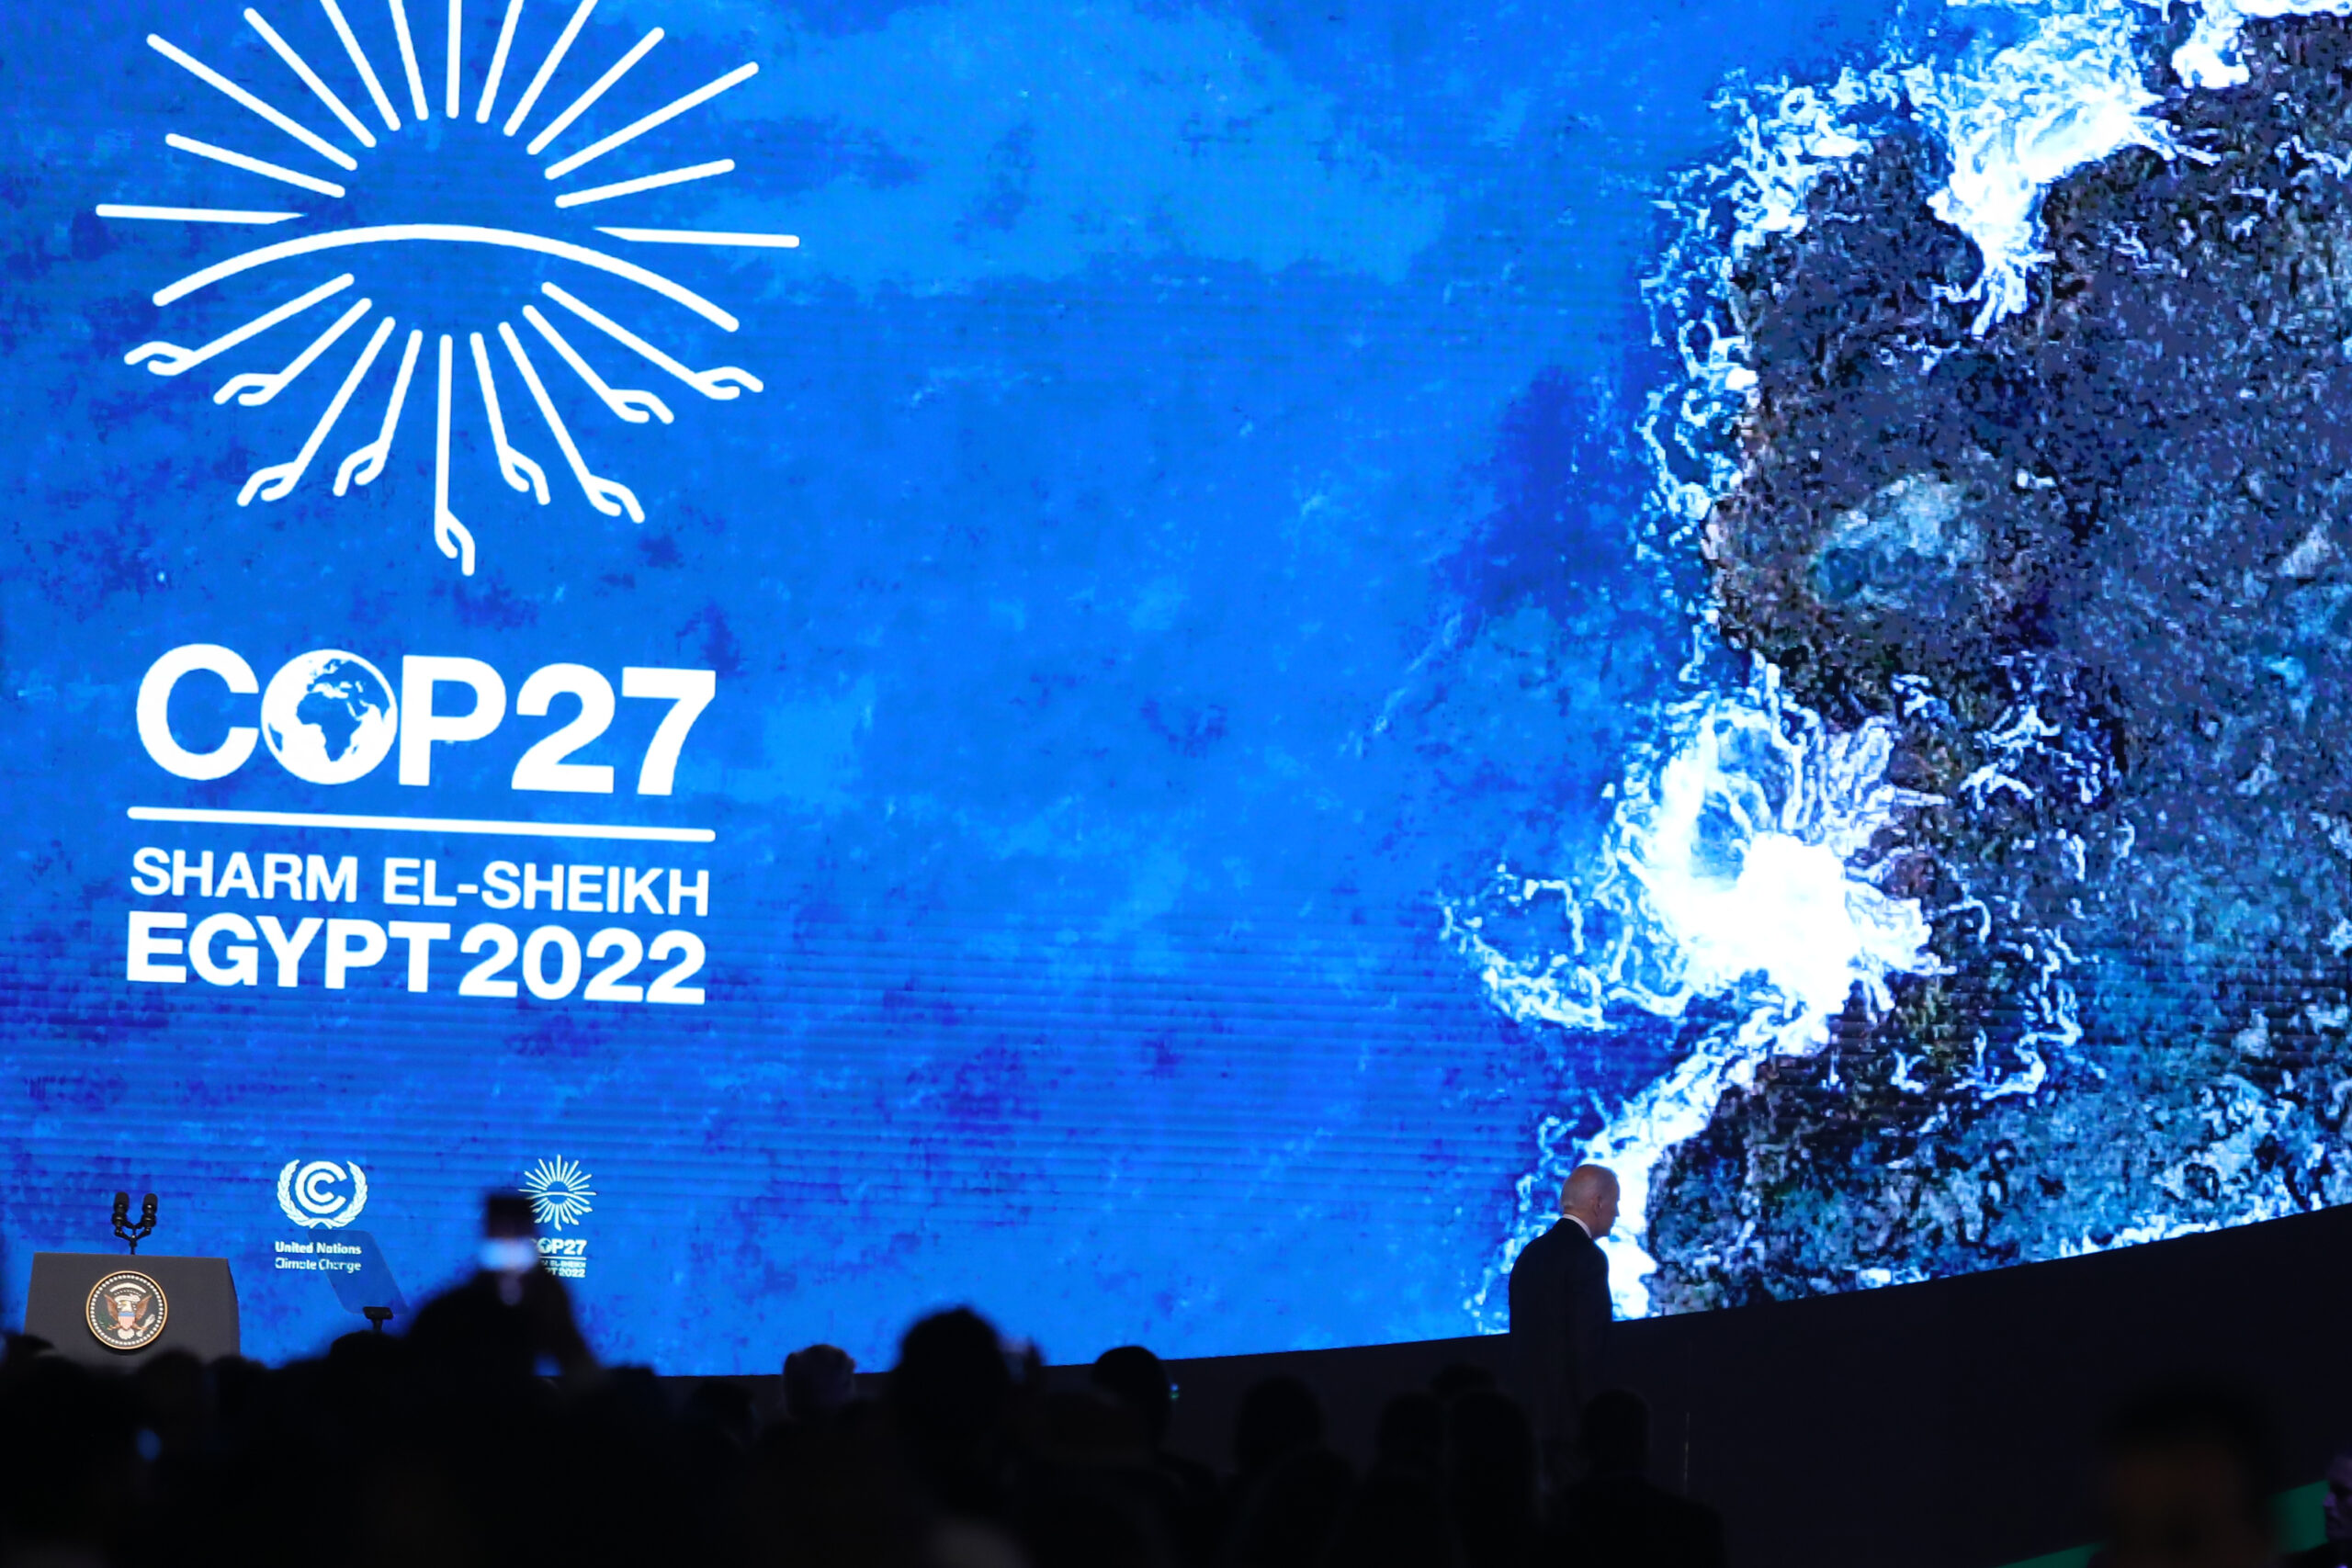 US President Joe Biden leaves after delivers a speech during the 2022 United Nations Climate Change Conference, more commonly known as COP27, at the Sharm El Sheikh International Convention Centre, in Egypt's Red Sea resort of Sharm El Sheikh, Egypt on November 11, 2022. [ Mohamed Abdel Hamid - Anadolu Agency]